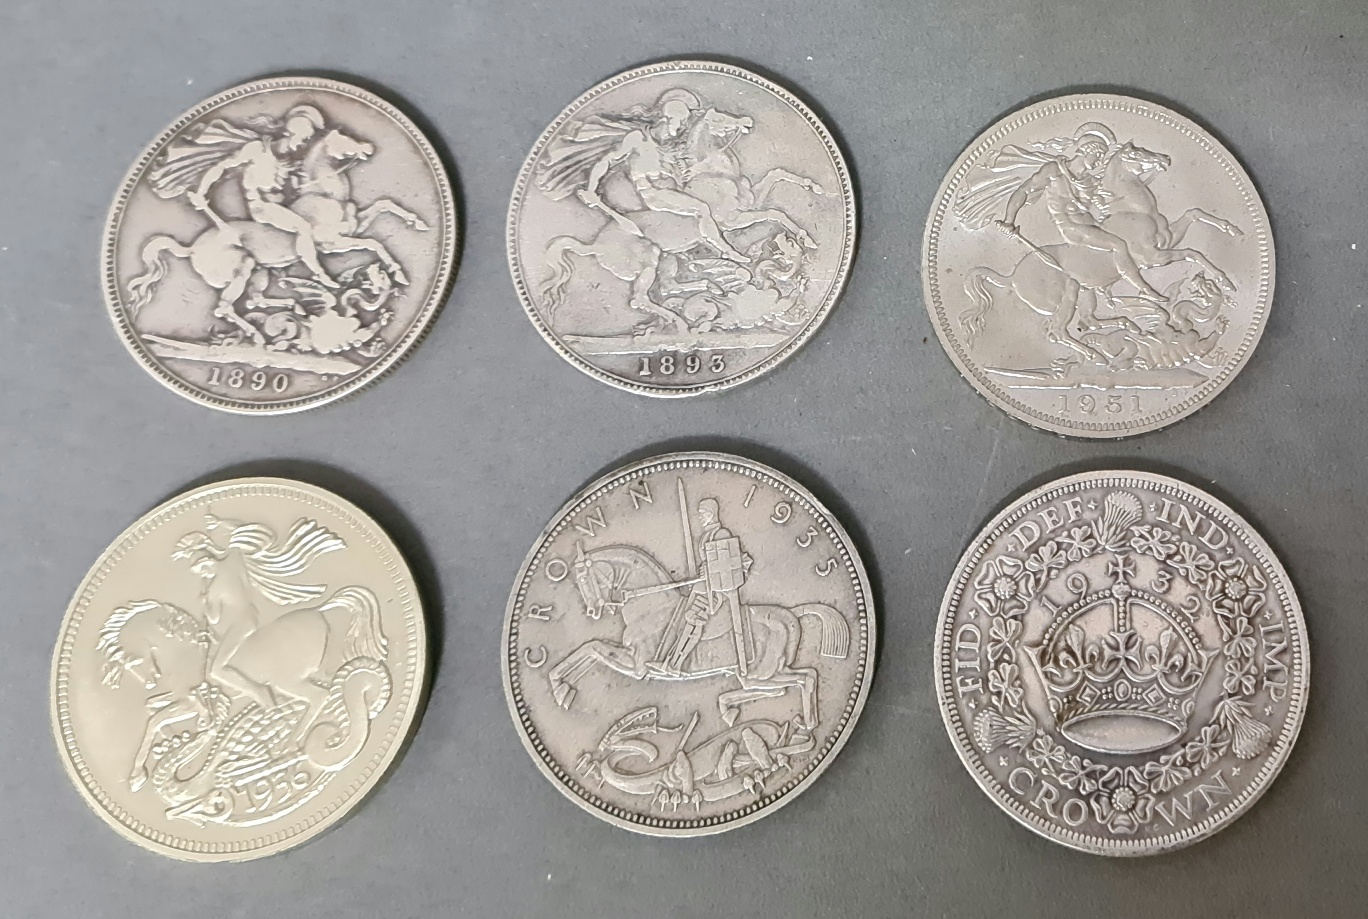 Six British crown coins including 1890, 1893, 1932, 1935, 1936, and 1951